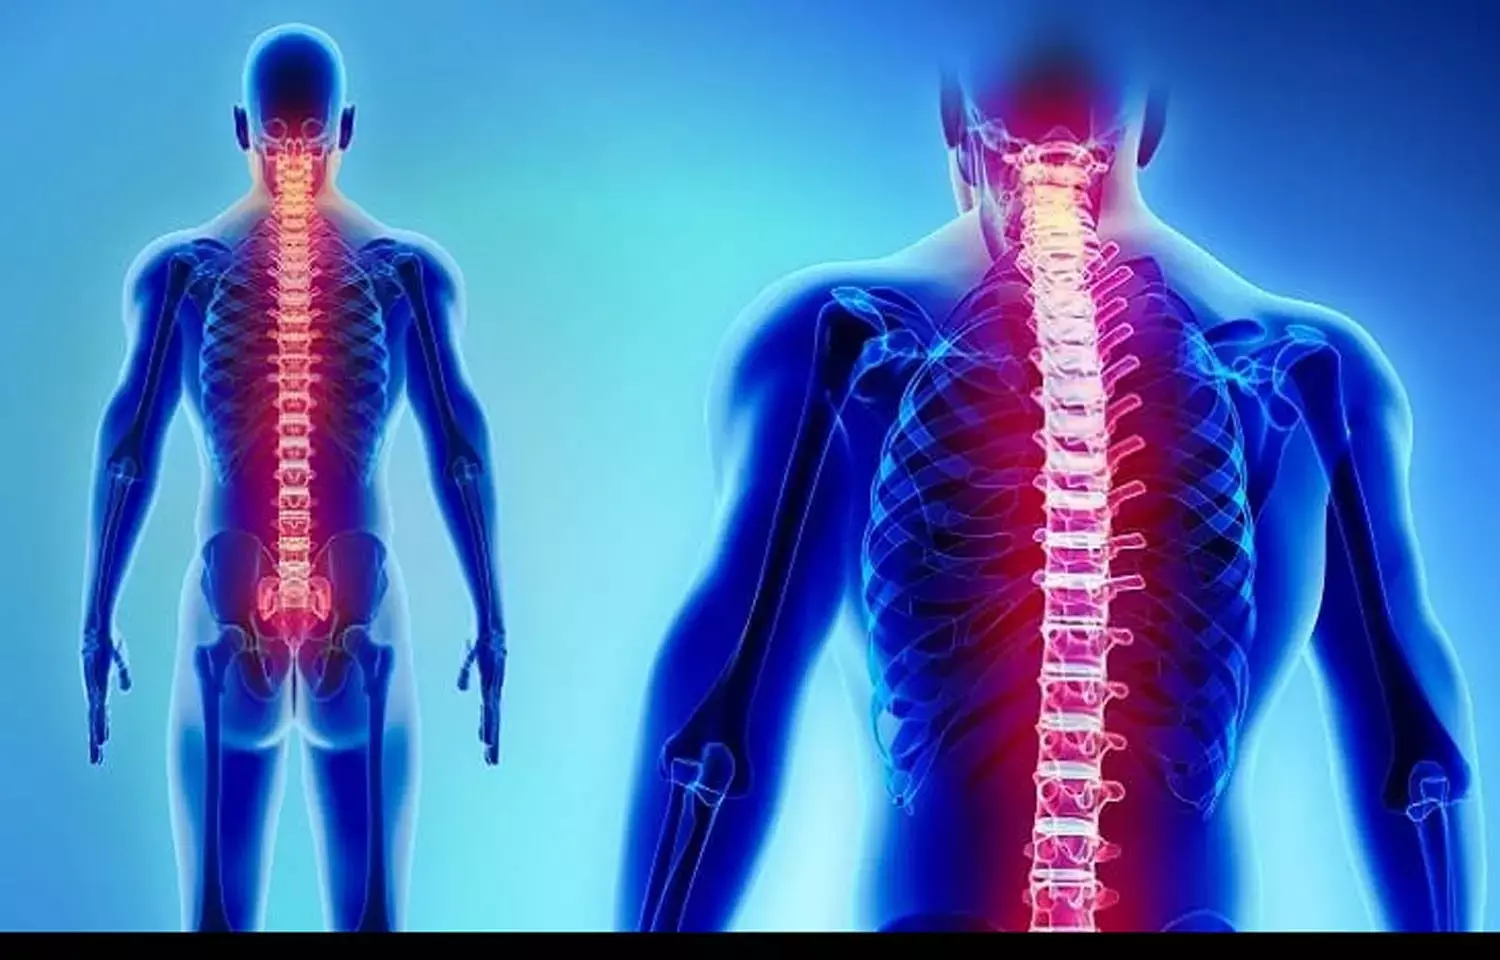 Epidural steroid injections dont increase postoperative complications of spine surgery : Study